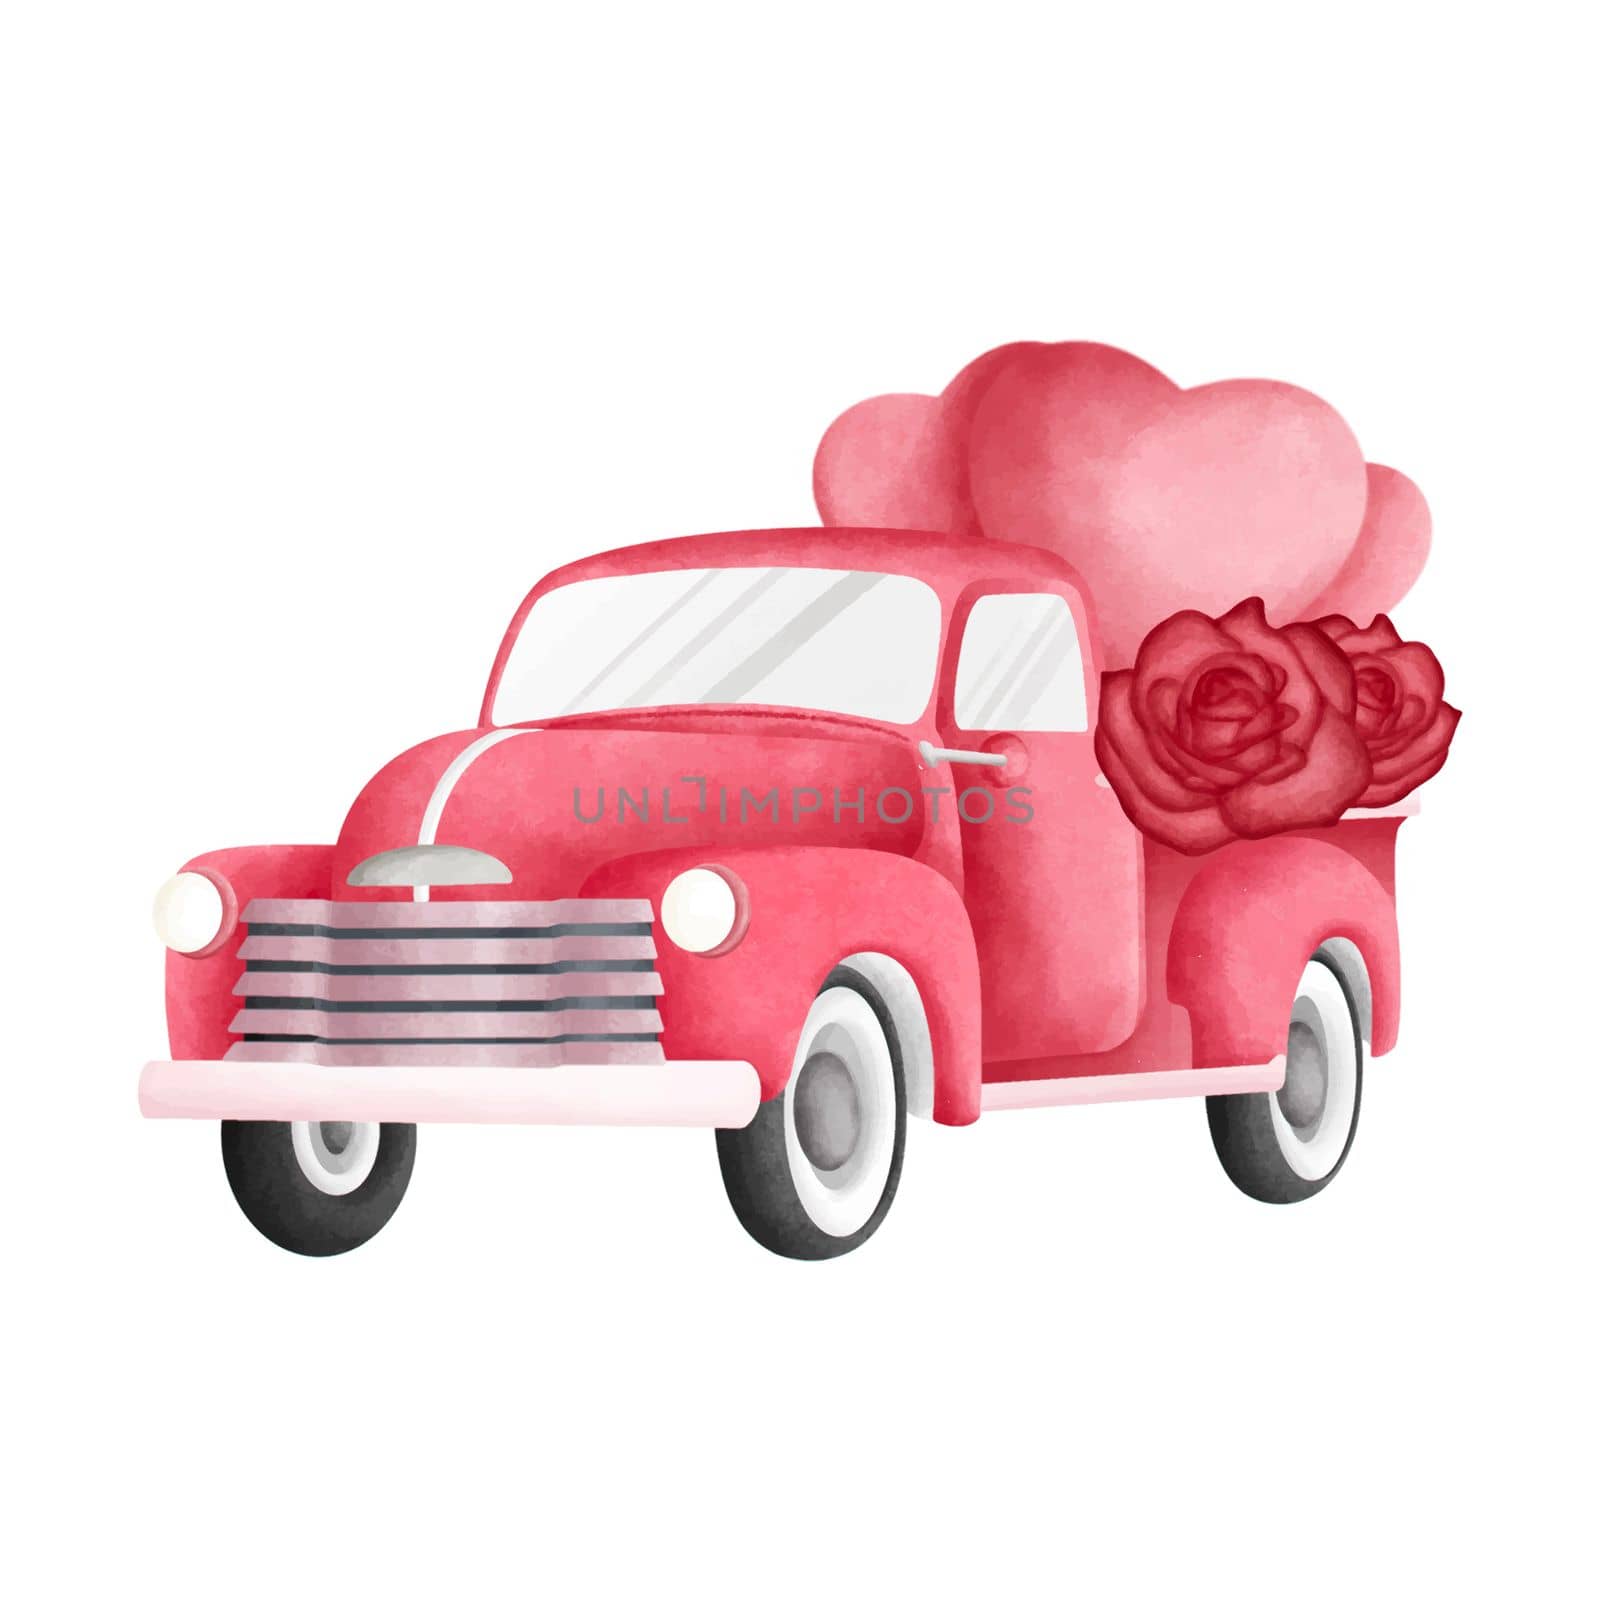 Red Love Truck  Cute Romantic Watercolor Clipart PNG. Paris In Love collection with lovely red truck with hearts and roses for romantic design element, love art, wedding watercolor illustration. by Skyecreativestudio